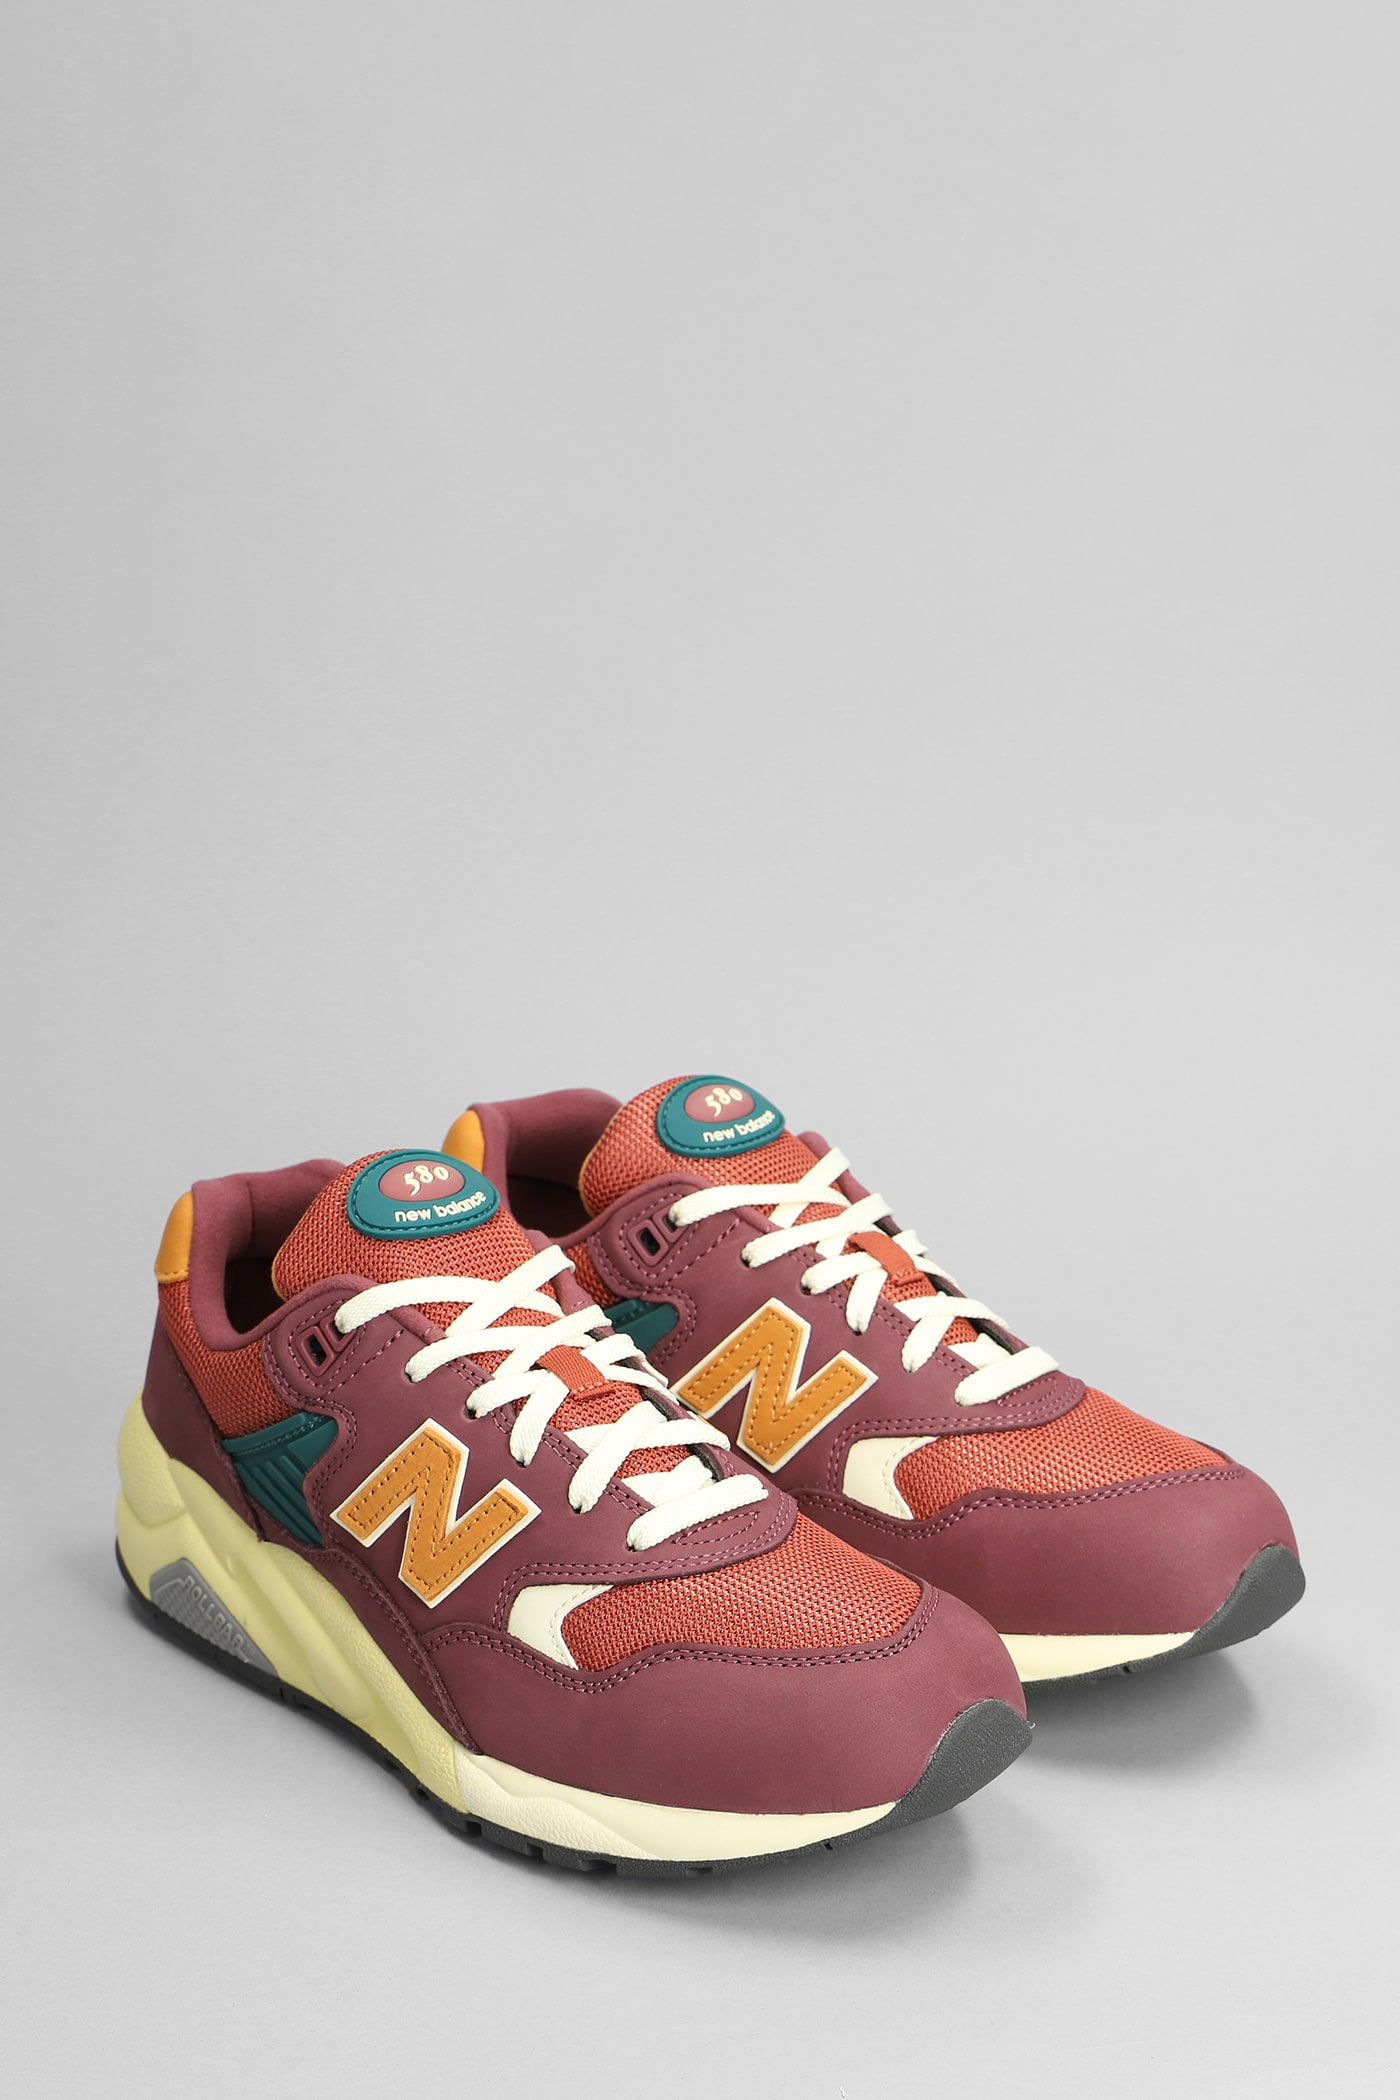 Shop New Balance 580 Sneakers In Bordeaux Leather And Fabric